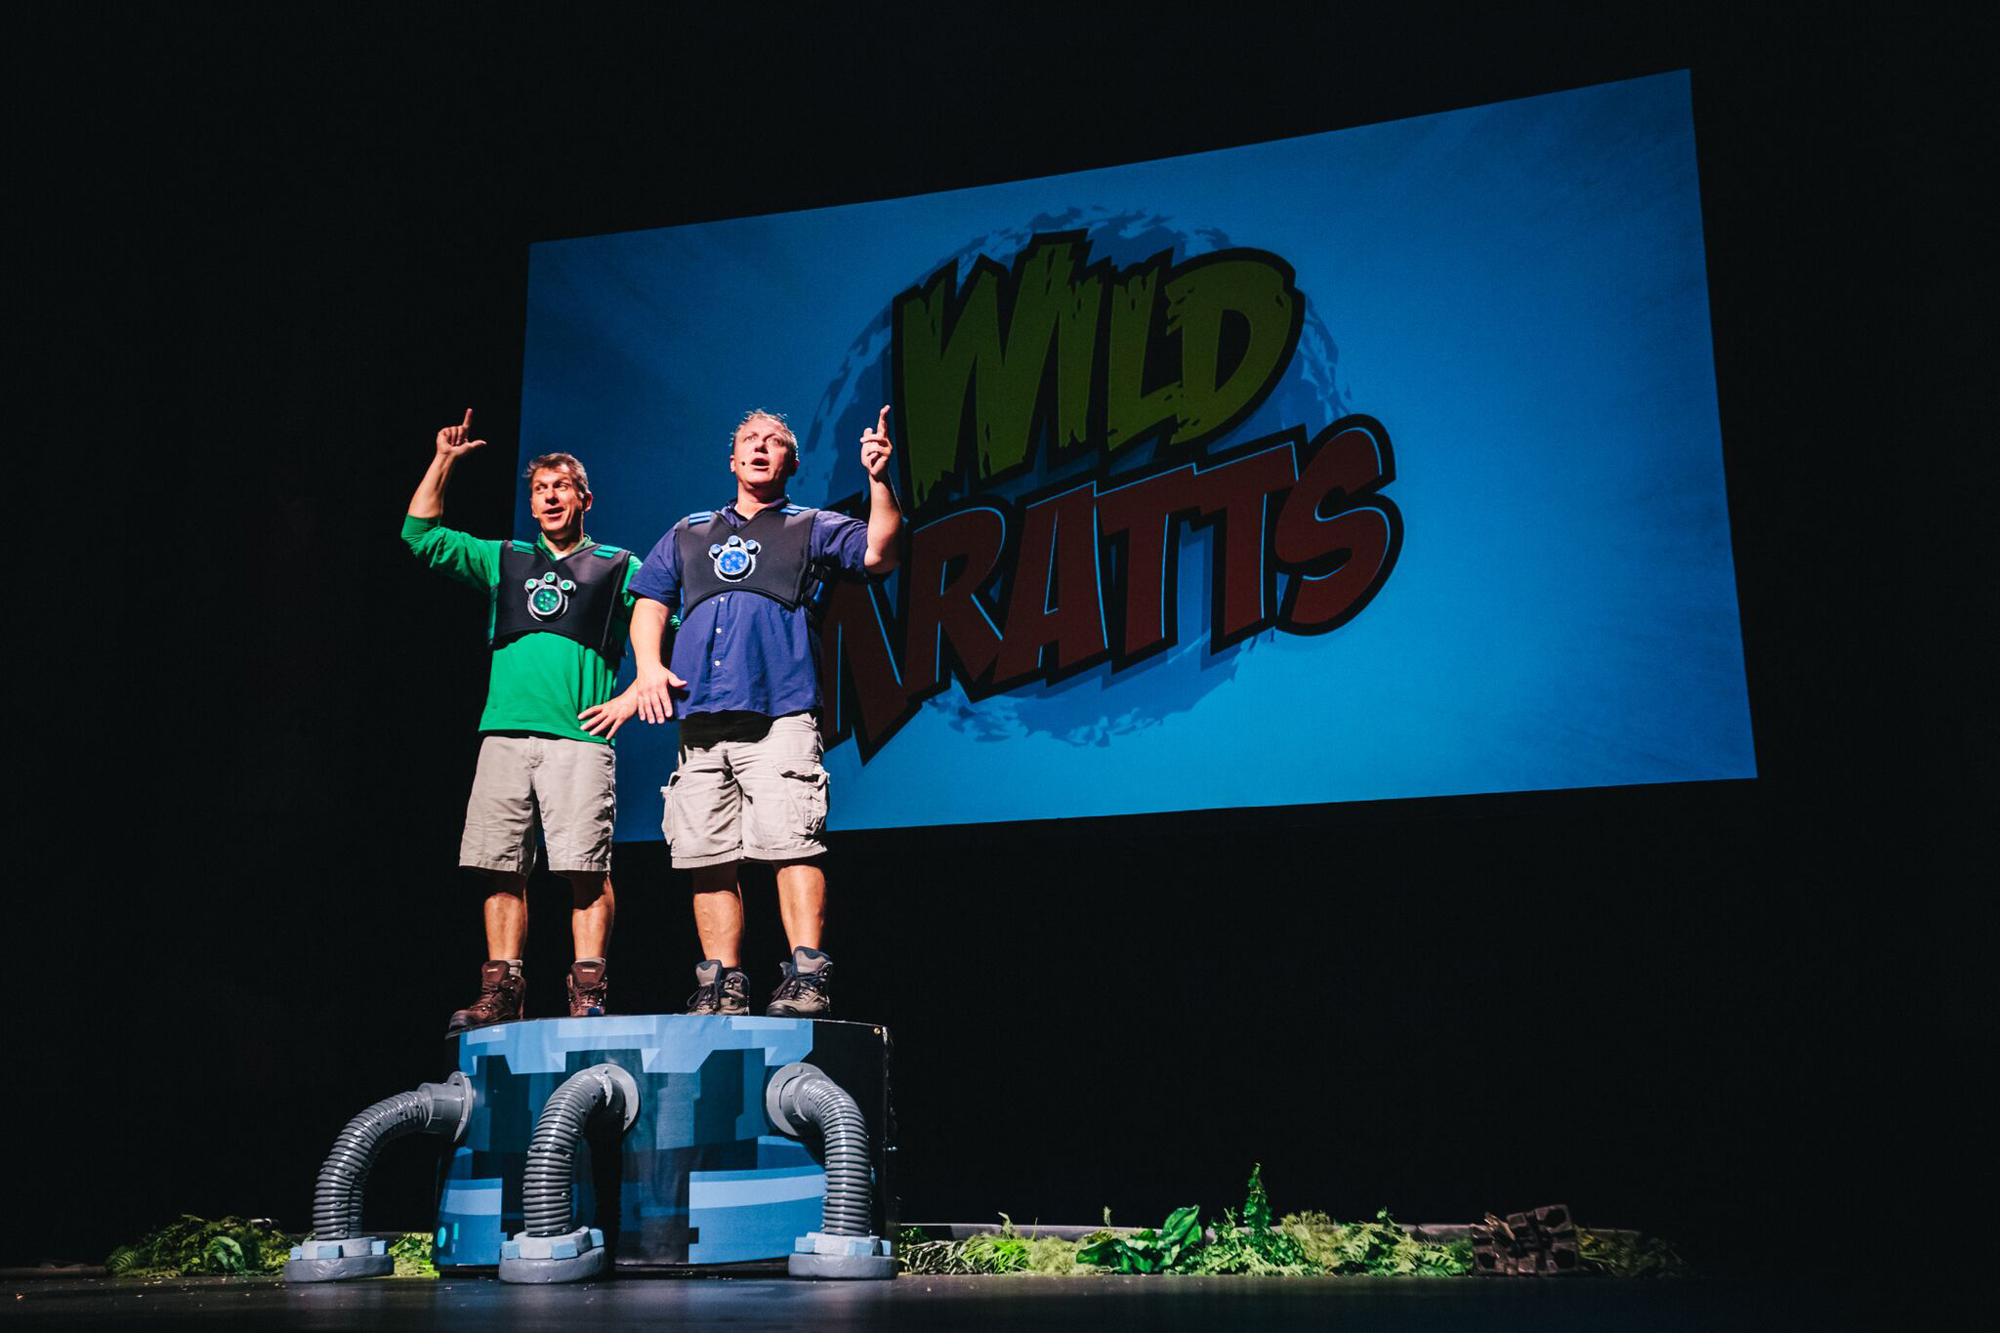 PBS Kids show 'Wild Kratts' brings live tour to Kirby Center in Wilkes